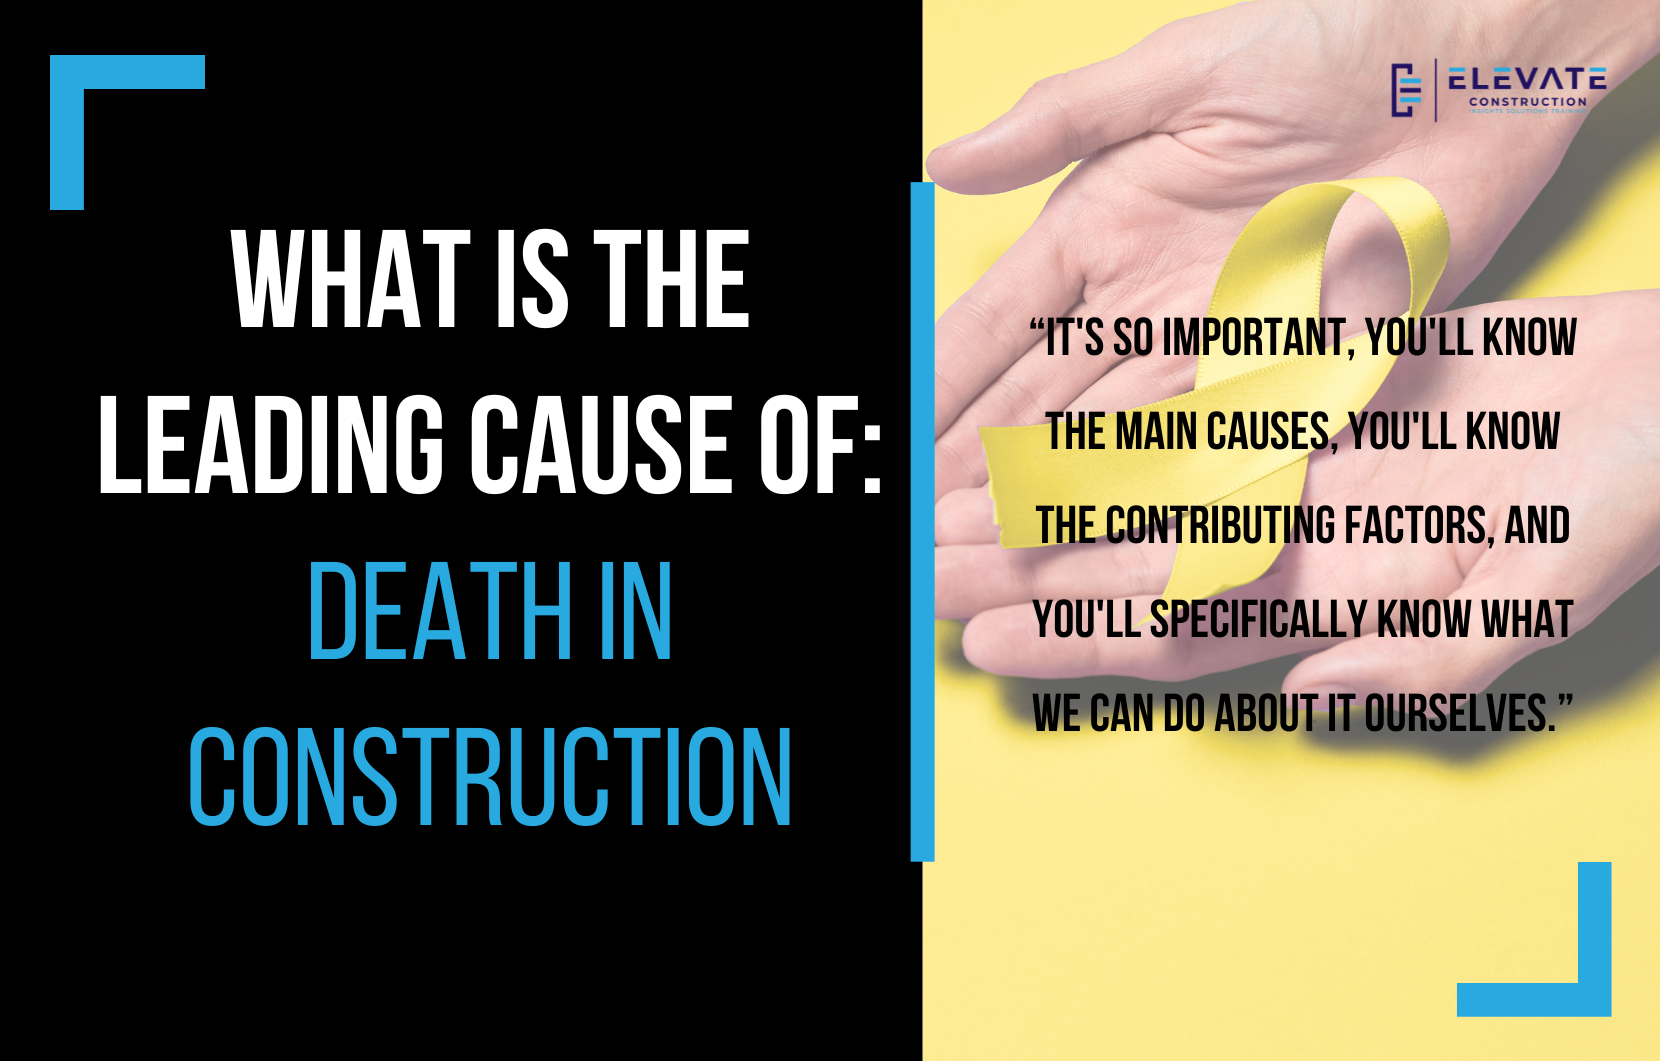 What Is The Leading Cause Of Death In Construction?